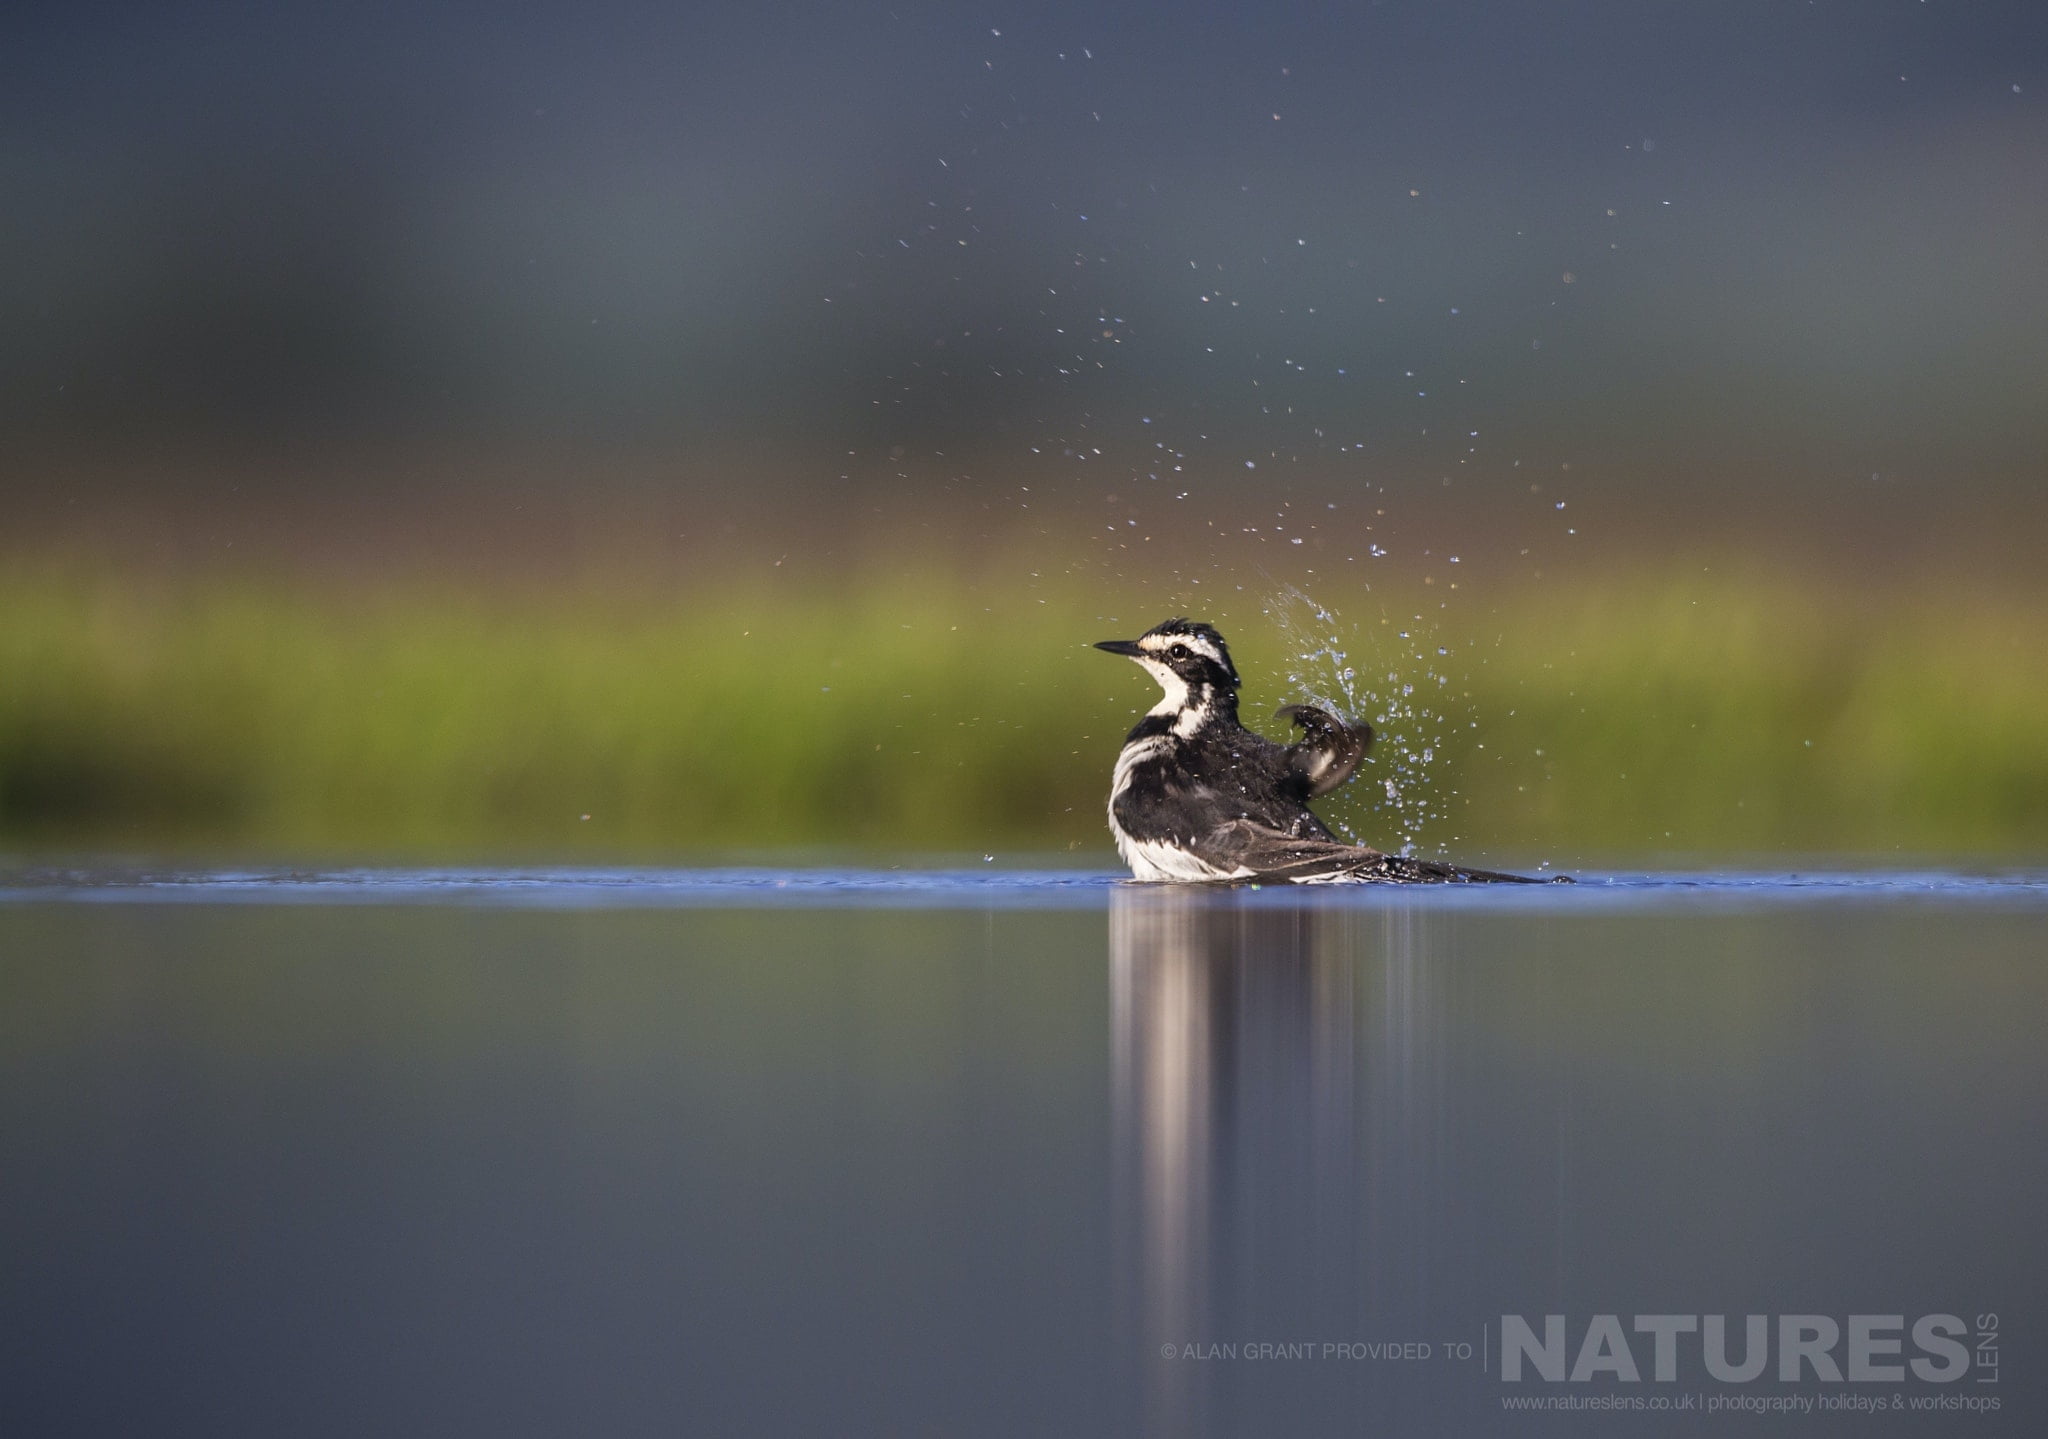 An African Pied Wagtail Having A Bath As Captured During The Zimanga Photography Safari Led By Natureslens